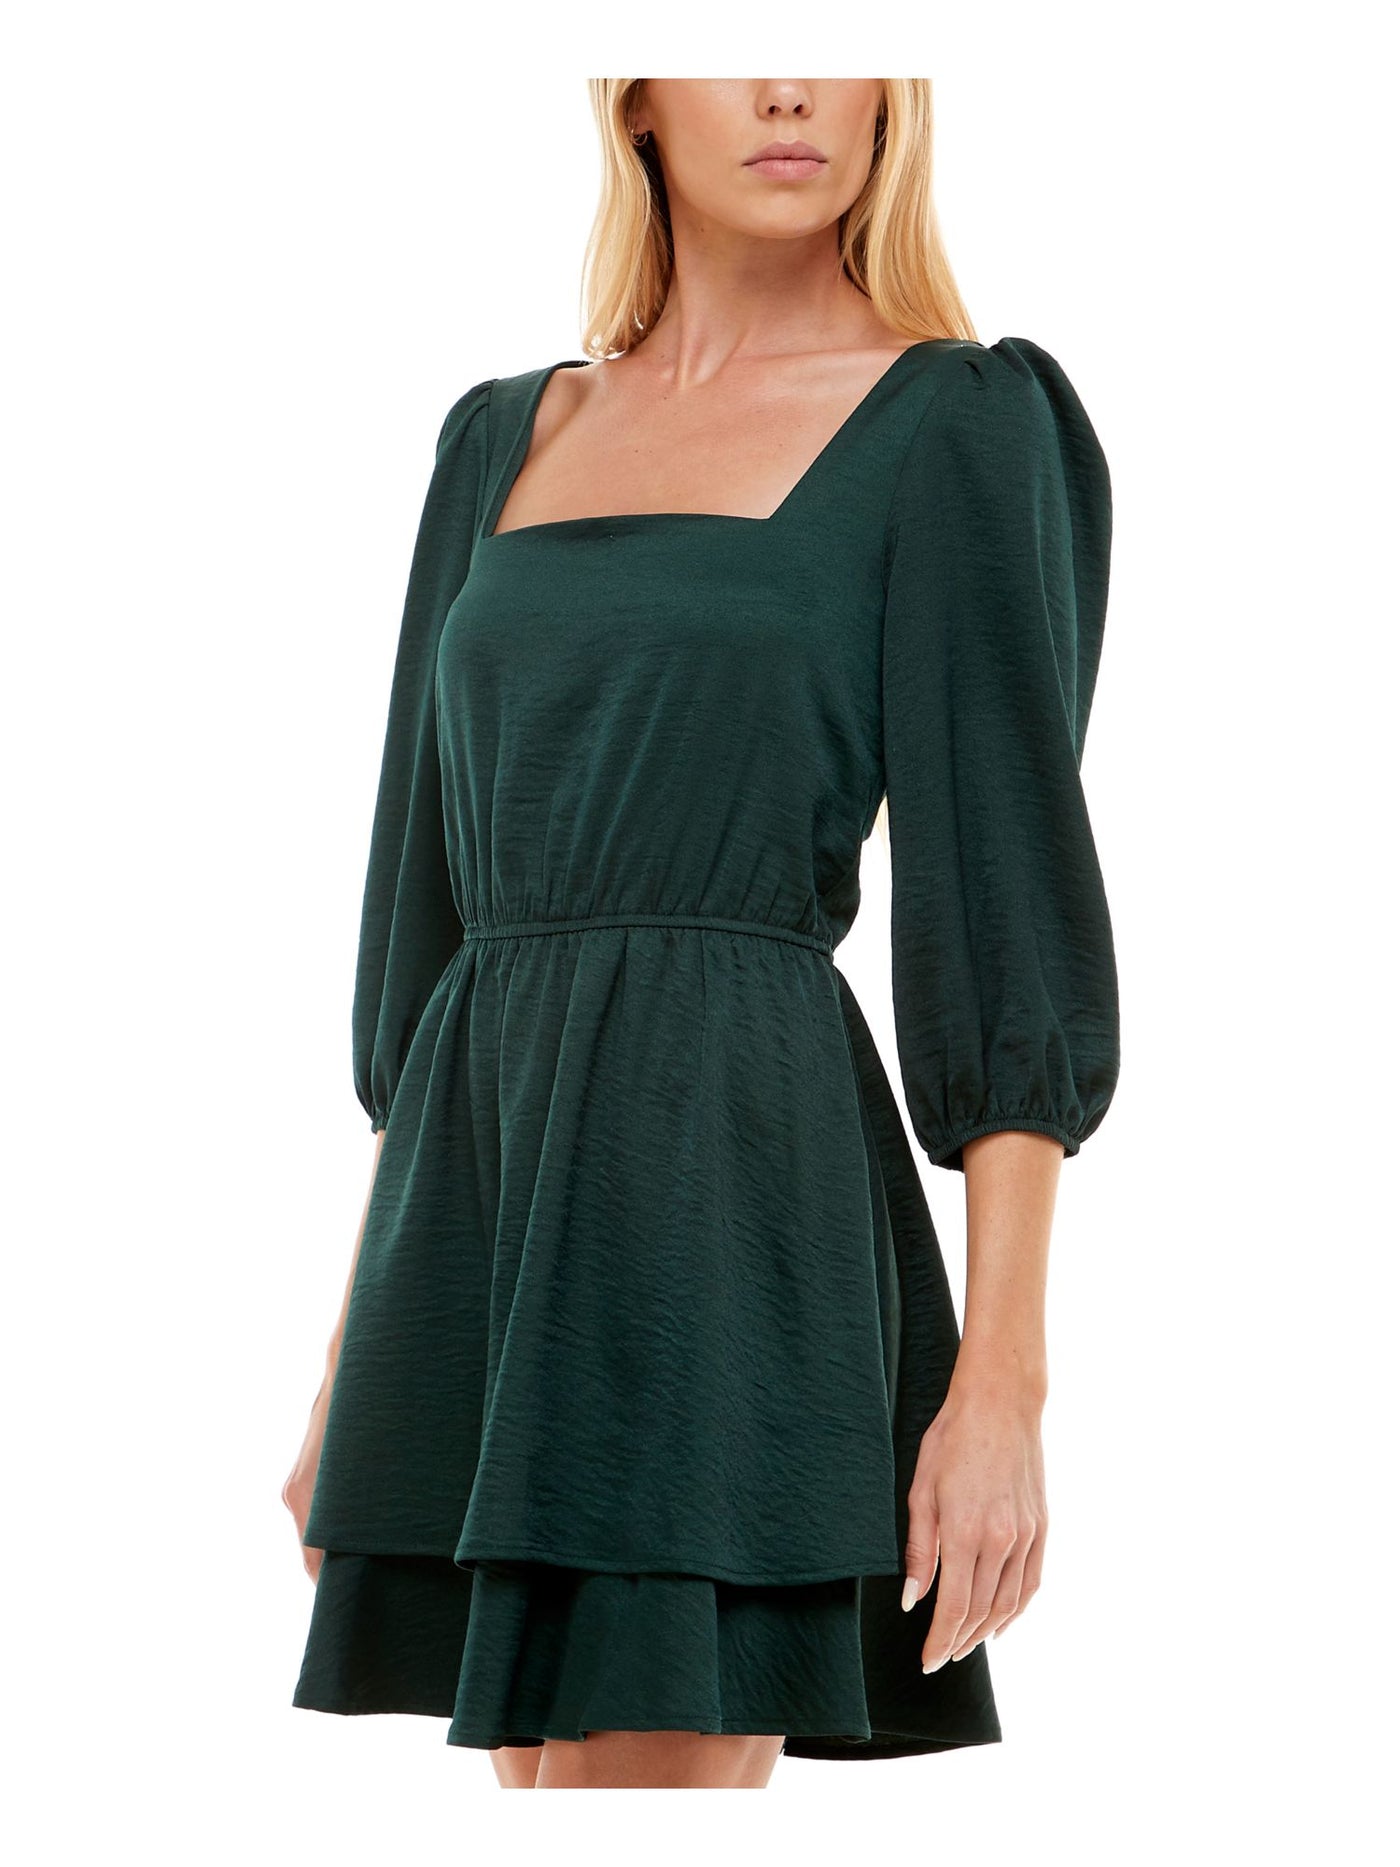 SPEECHLESS Womens Green Ruffled Keyhole Back 3/4 Sleeve Square Neck Short Party Fit + Flare Dress Juniors XS